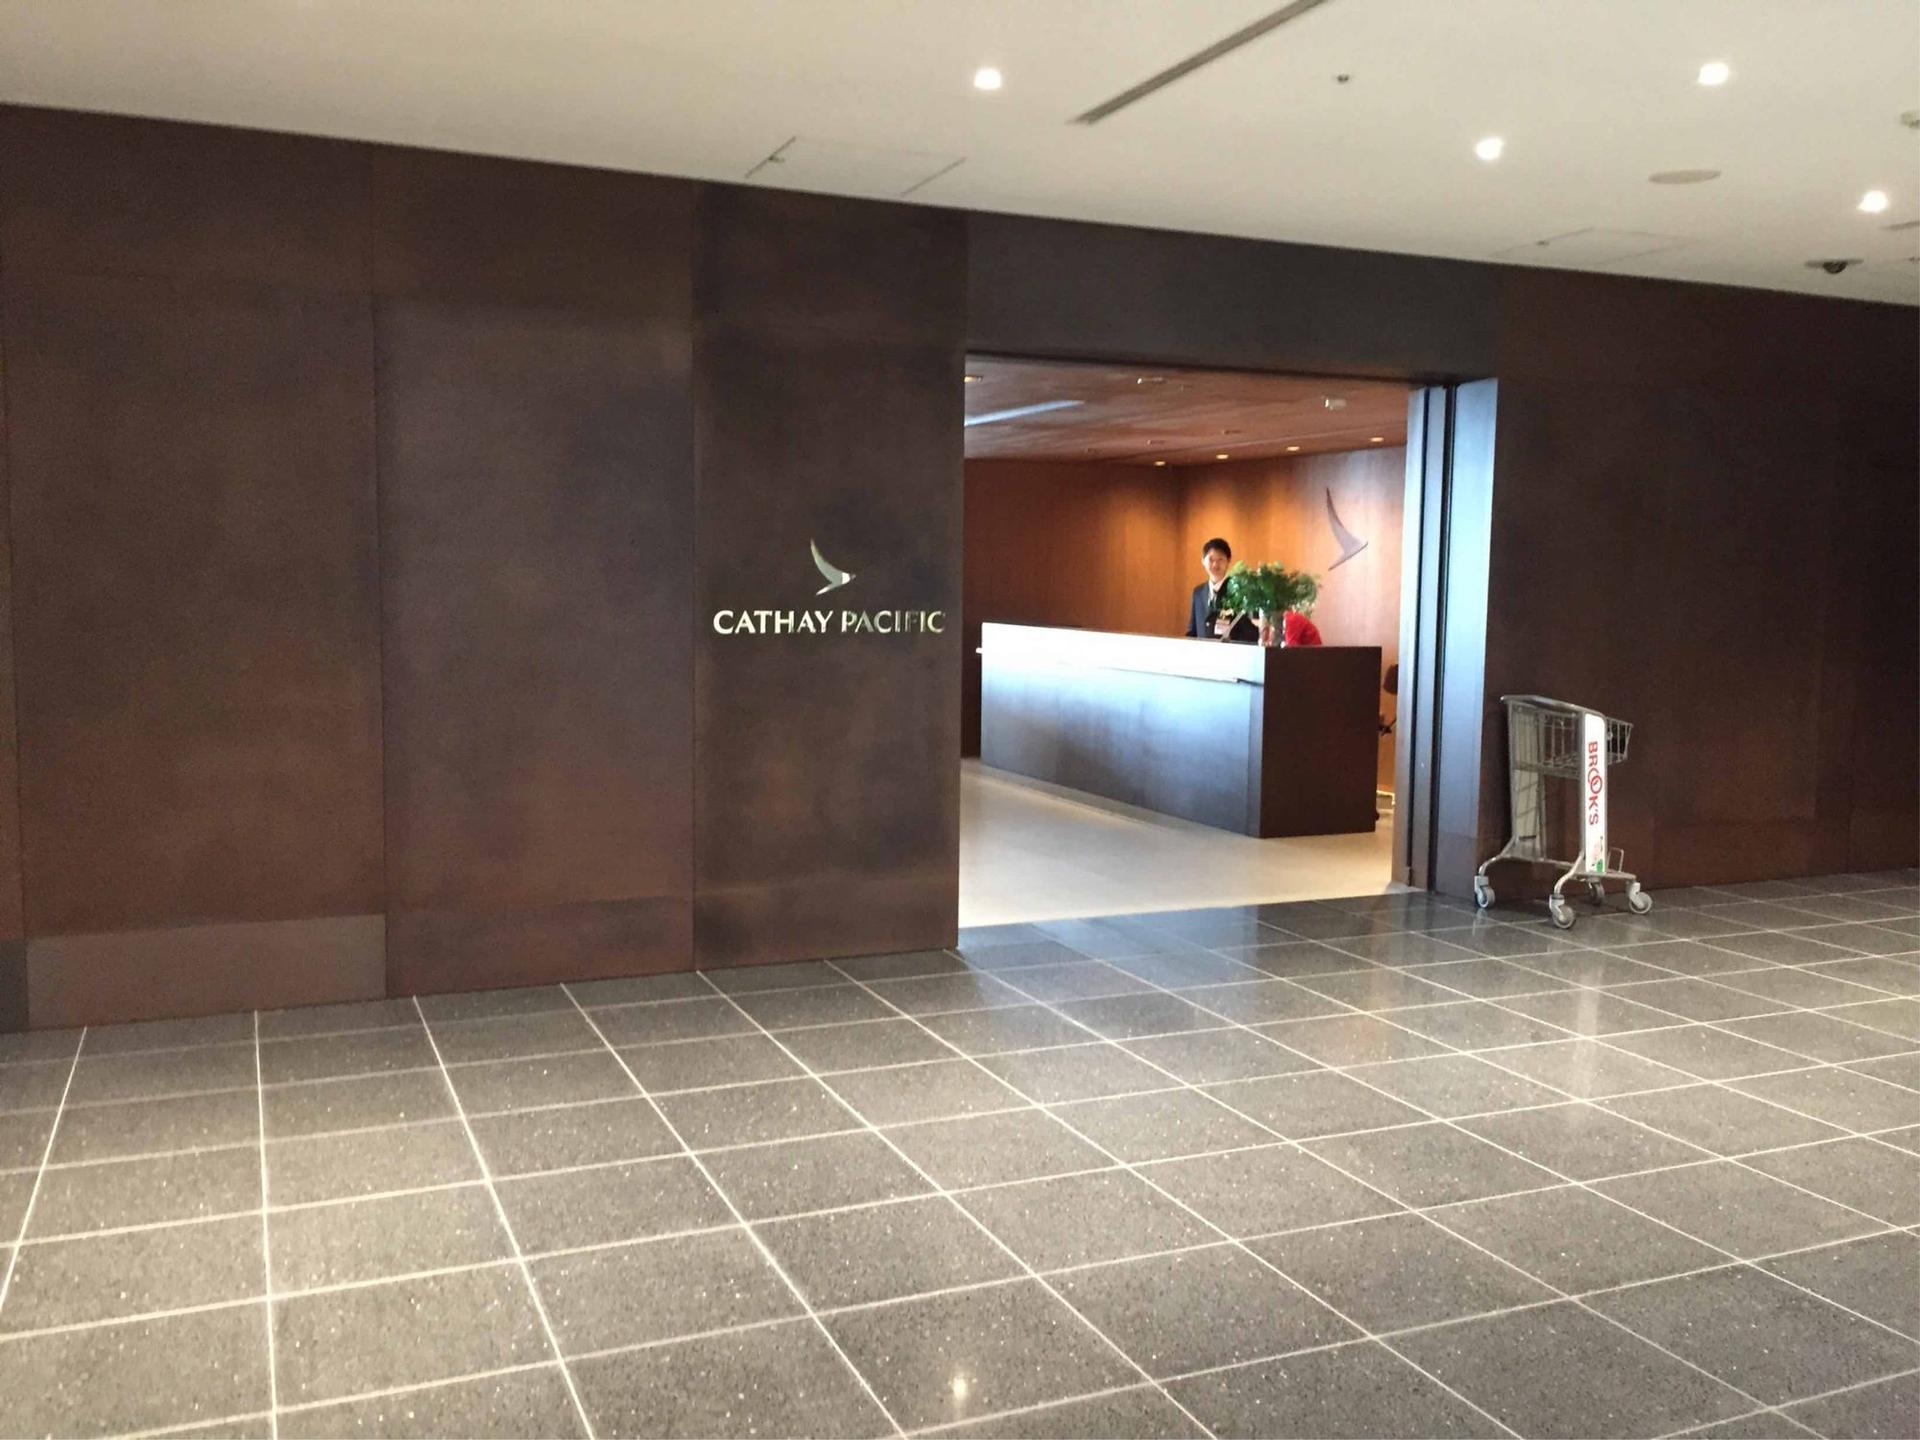 Cathay Pacific Lounge image 23 of 49